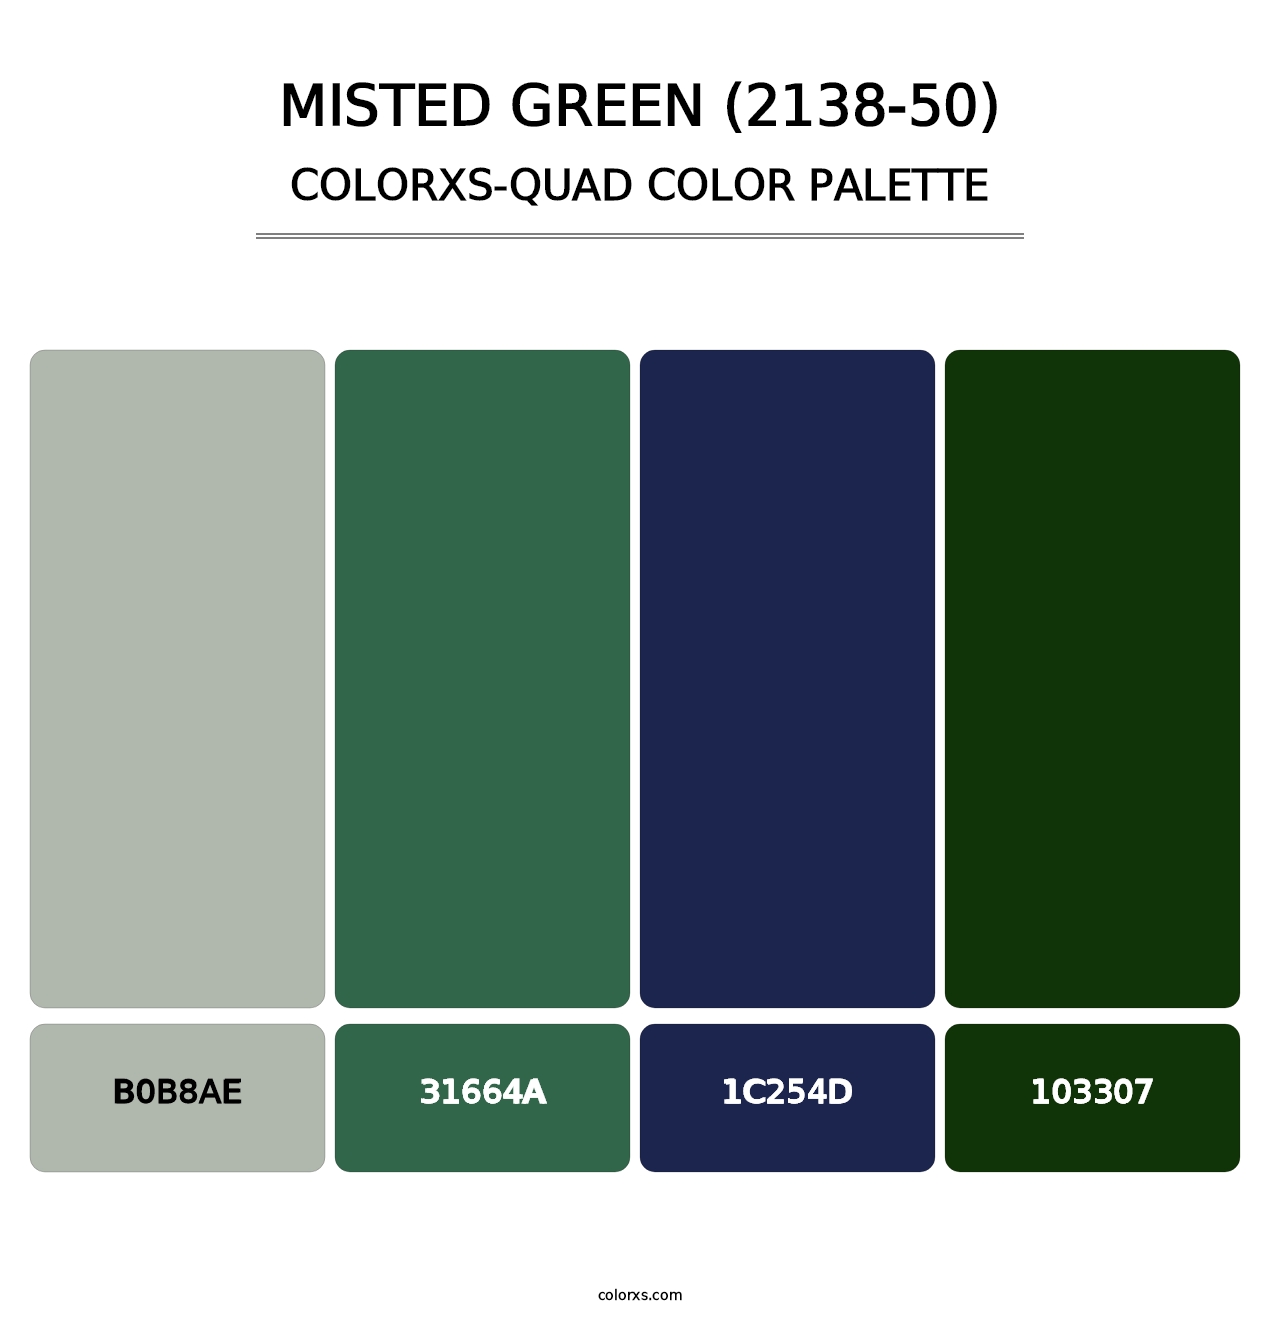 Misted Green (2138-50) - Colorxs Quad Palette